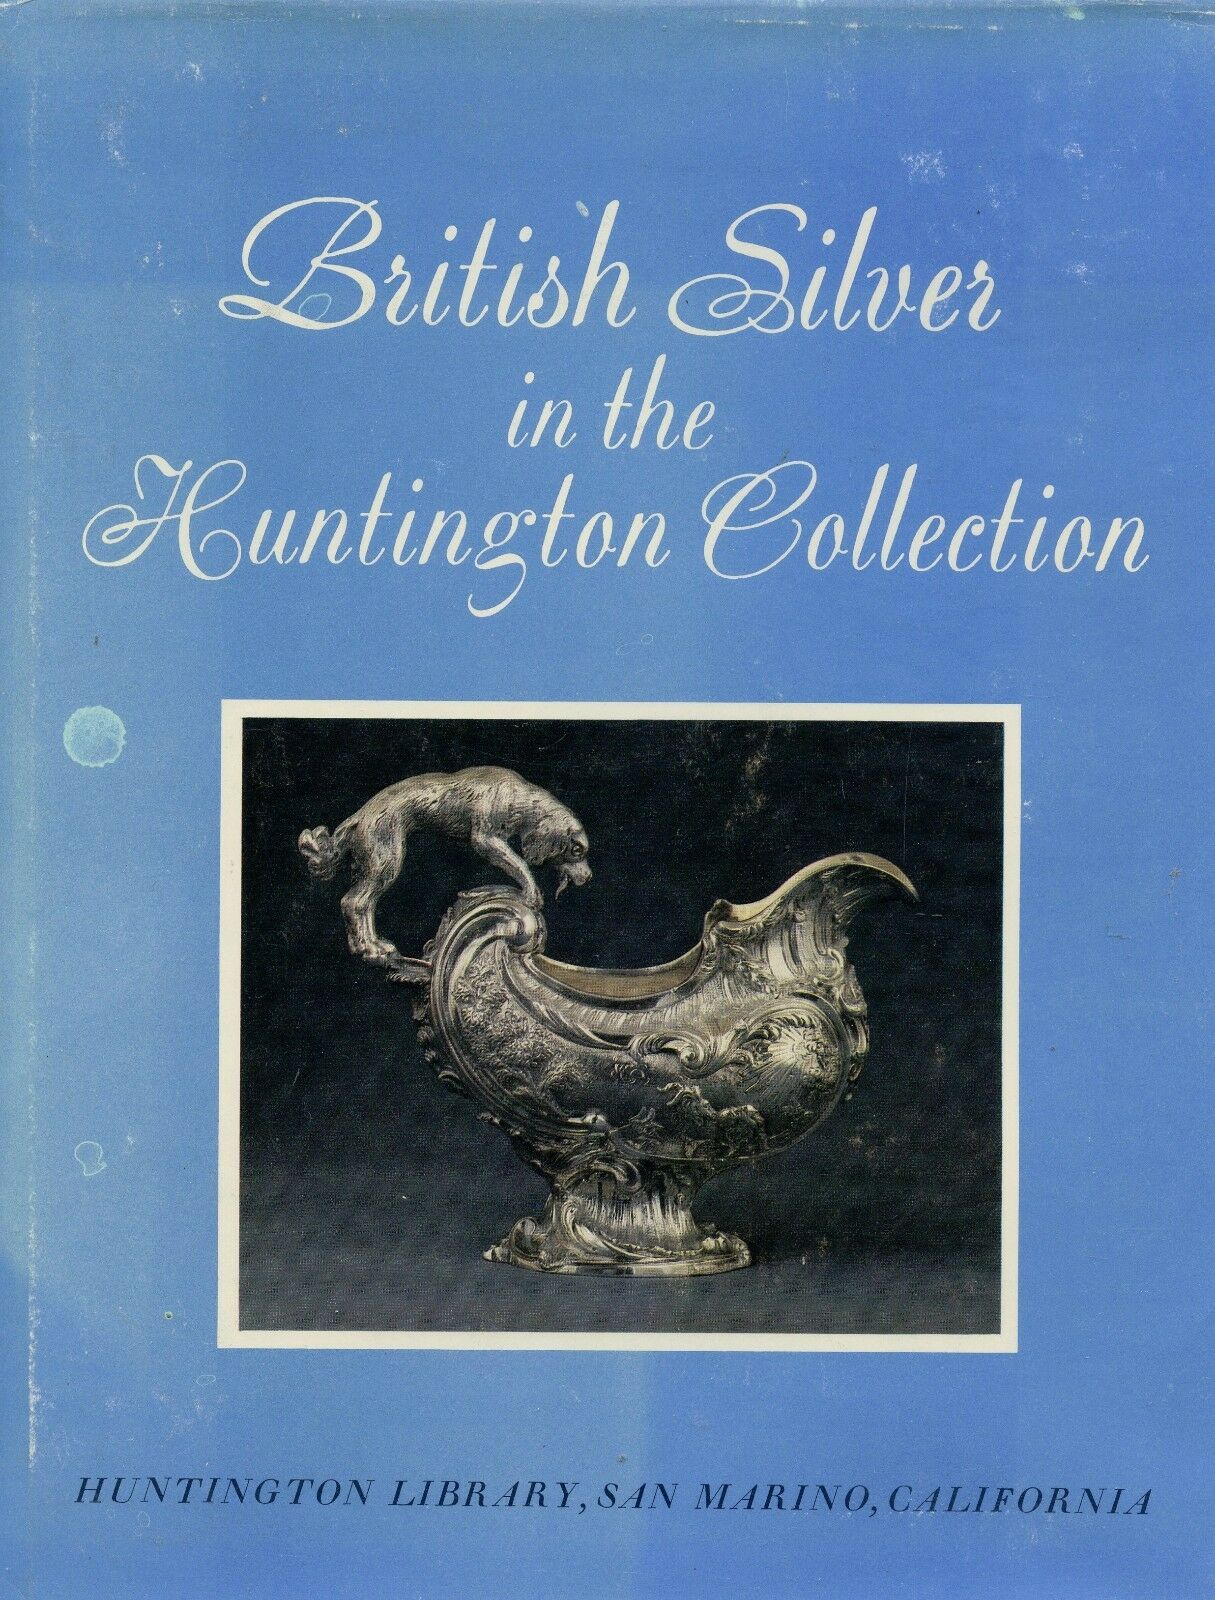 British Antique Silver - Huntington Collection / Scarce Illustrated Book